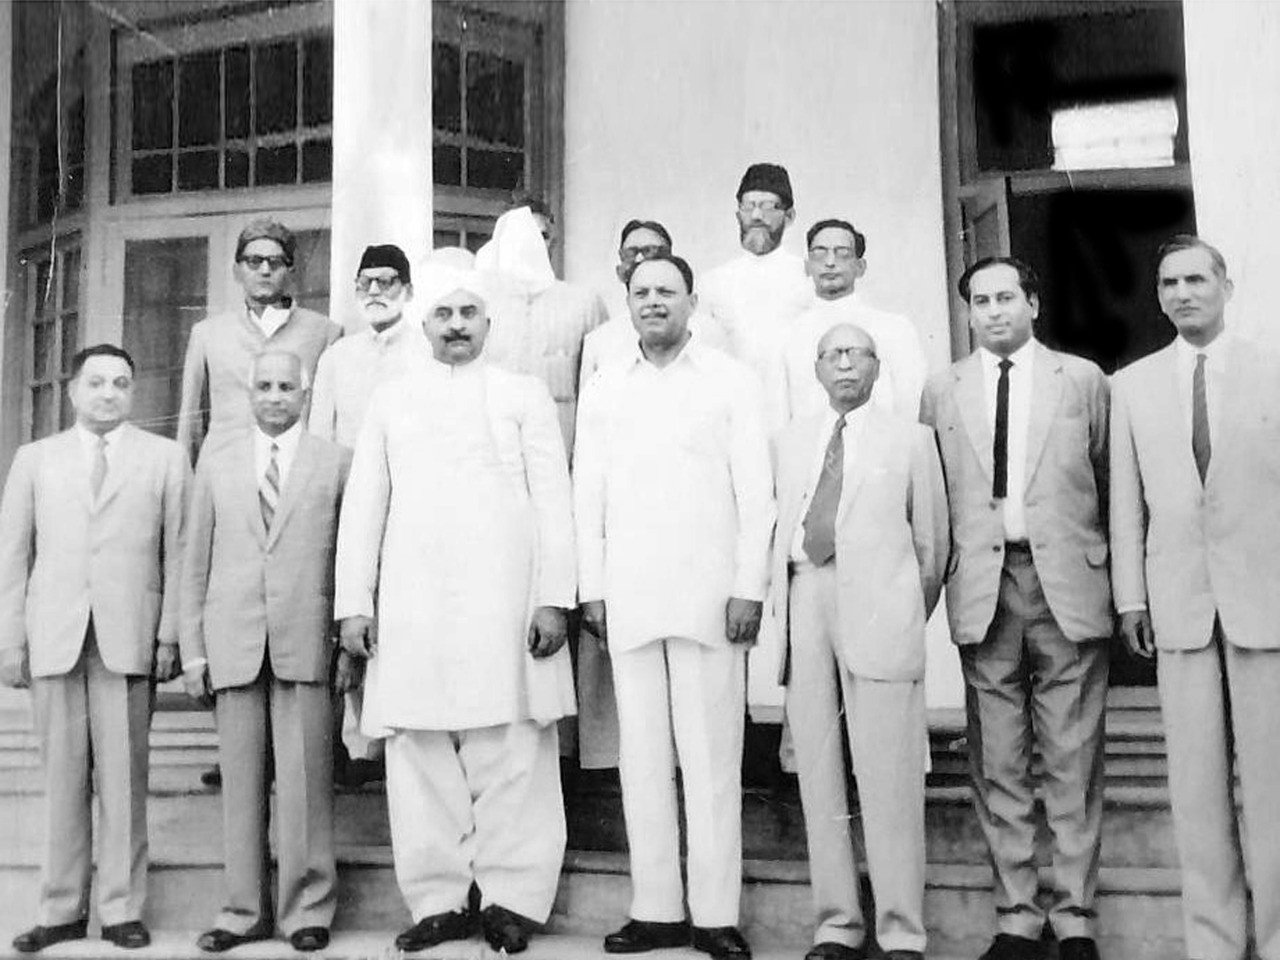 In 1962, President Ayub and Nawab of Kalabagh visited the Institute of Islamic Culture founded by Dr. Hakim in Lahore. In the works of Dr. Hakim, Zulfiqar Ali Bhutto (second from right) found what he was looking for: an author, a book, and a philosophy he could politically present as ‘Islamic Socialism’